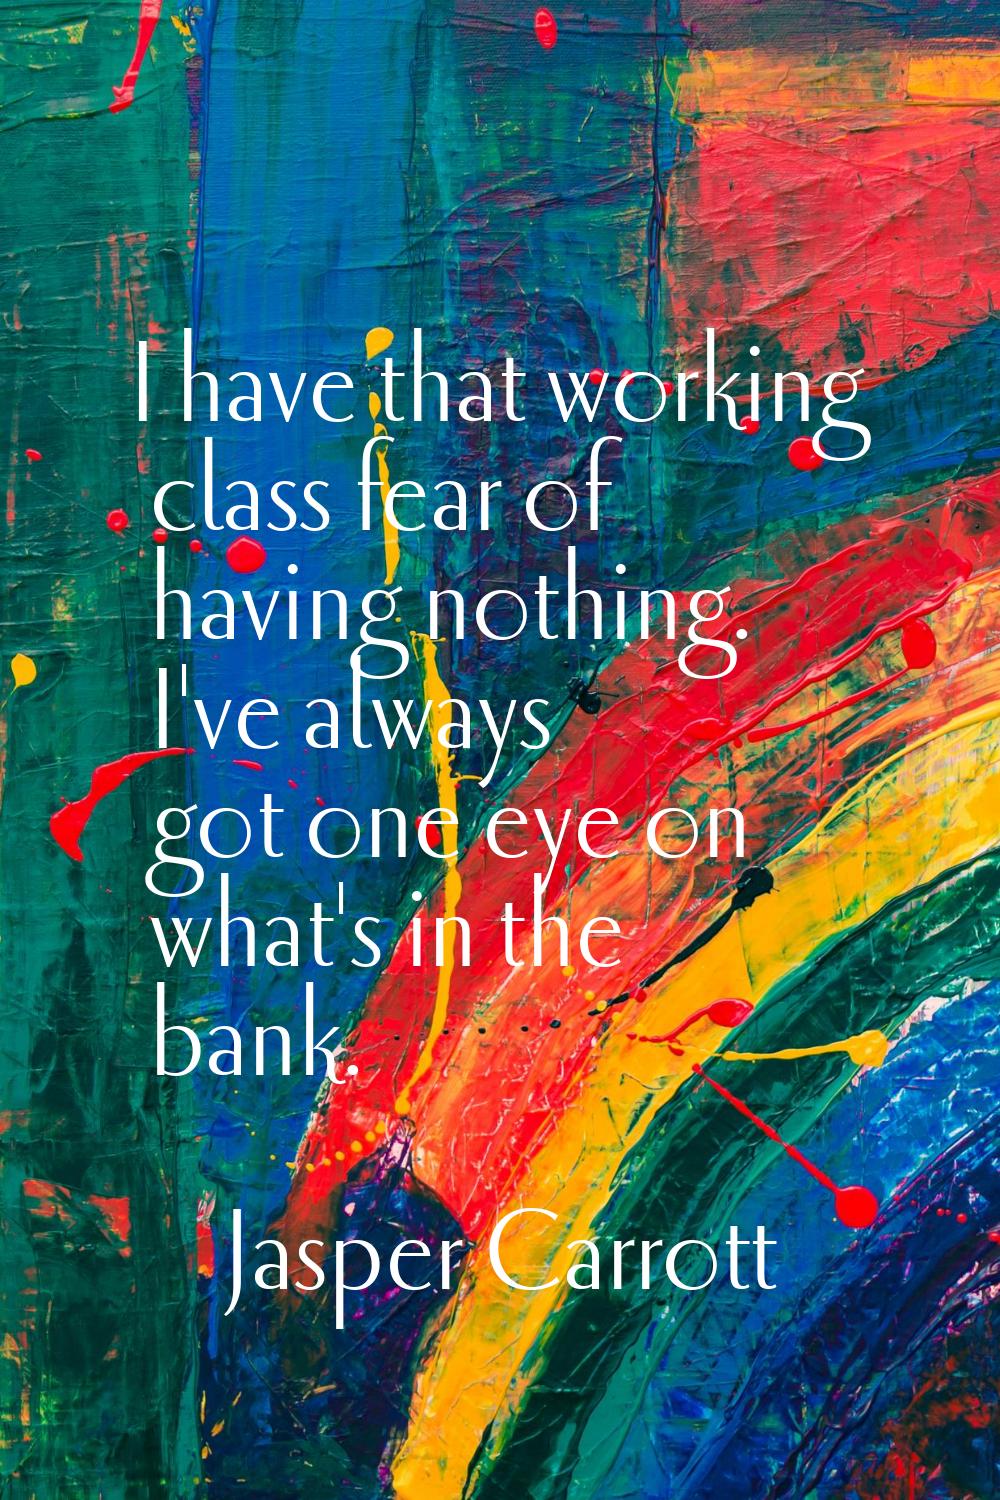 I have that working class fear of having nothing. I've always got one eye on what's in the bank.